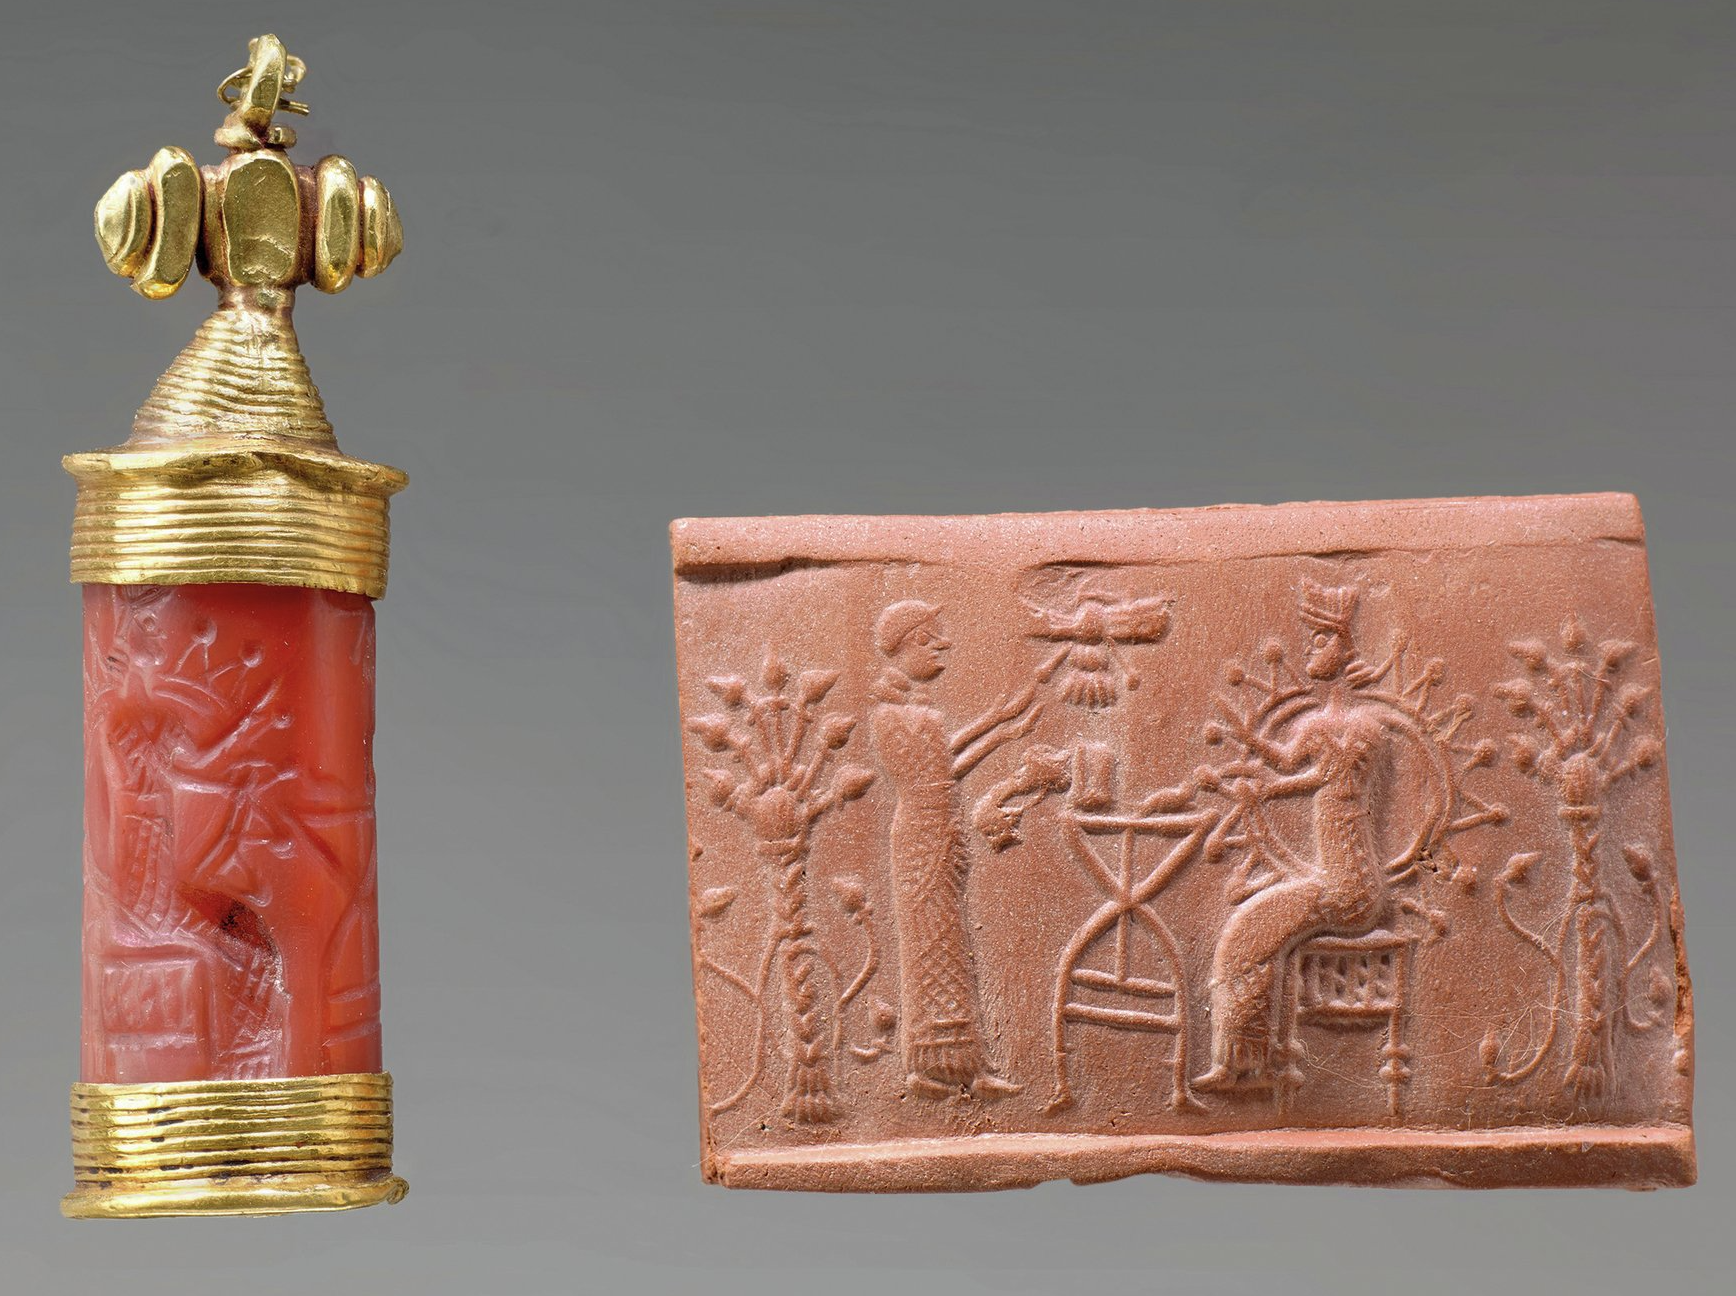 A Neo-Babylonian seal with a gold cap that allowed it to be worn. Cylinder Seal with an Offering to a Deity, about 1000-539 B.C. Musée du Louvre, Le département des Antiquités. featured in the Getty Villa exhibition, "Mesopotamia: Civilization Begins." 